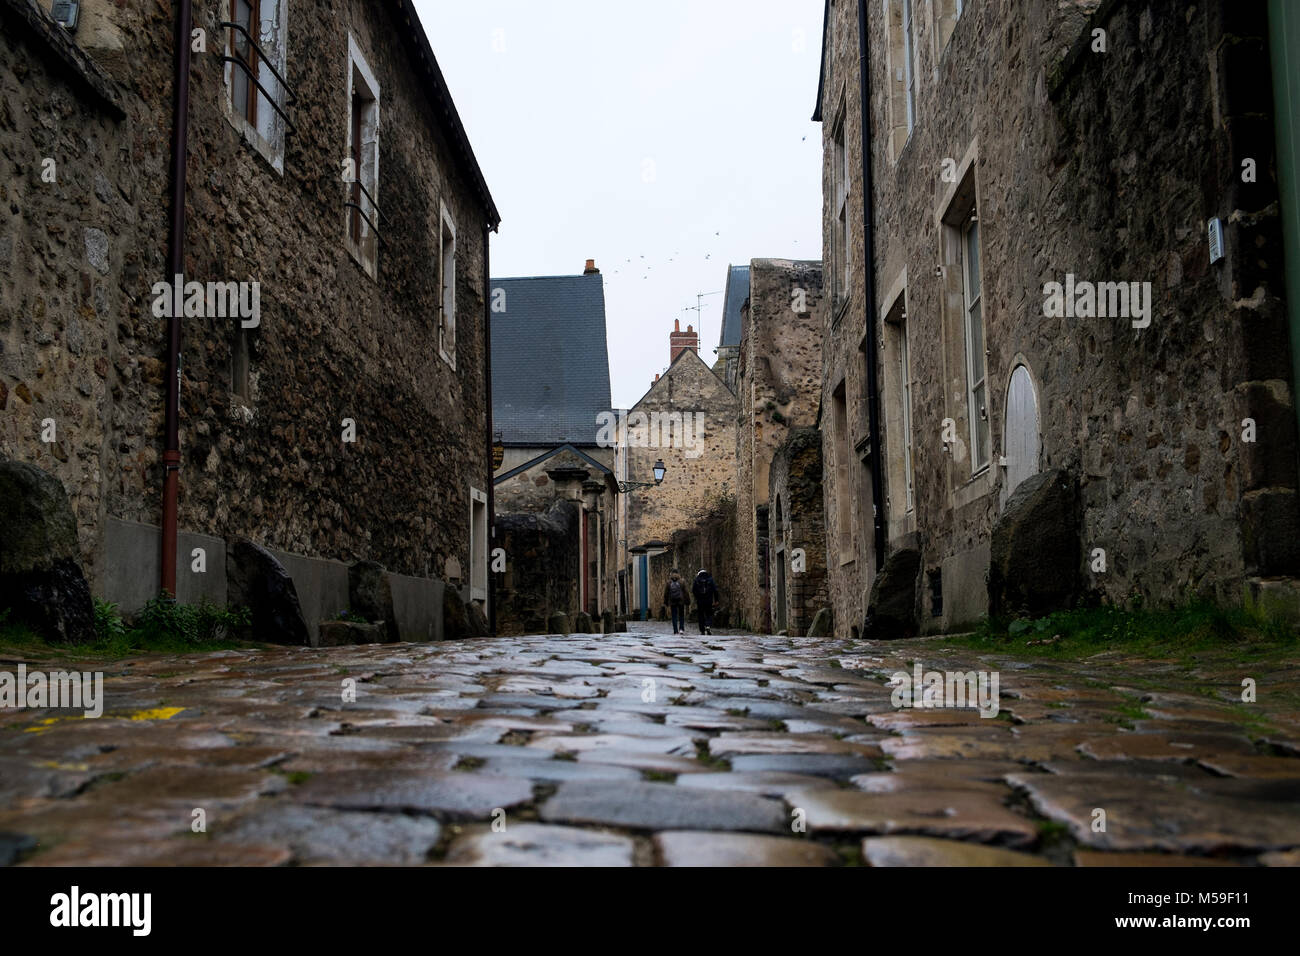 Cobbles and houses in the old town of Le Mans, France Stock Photo